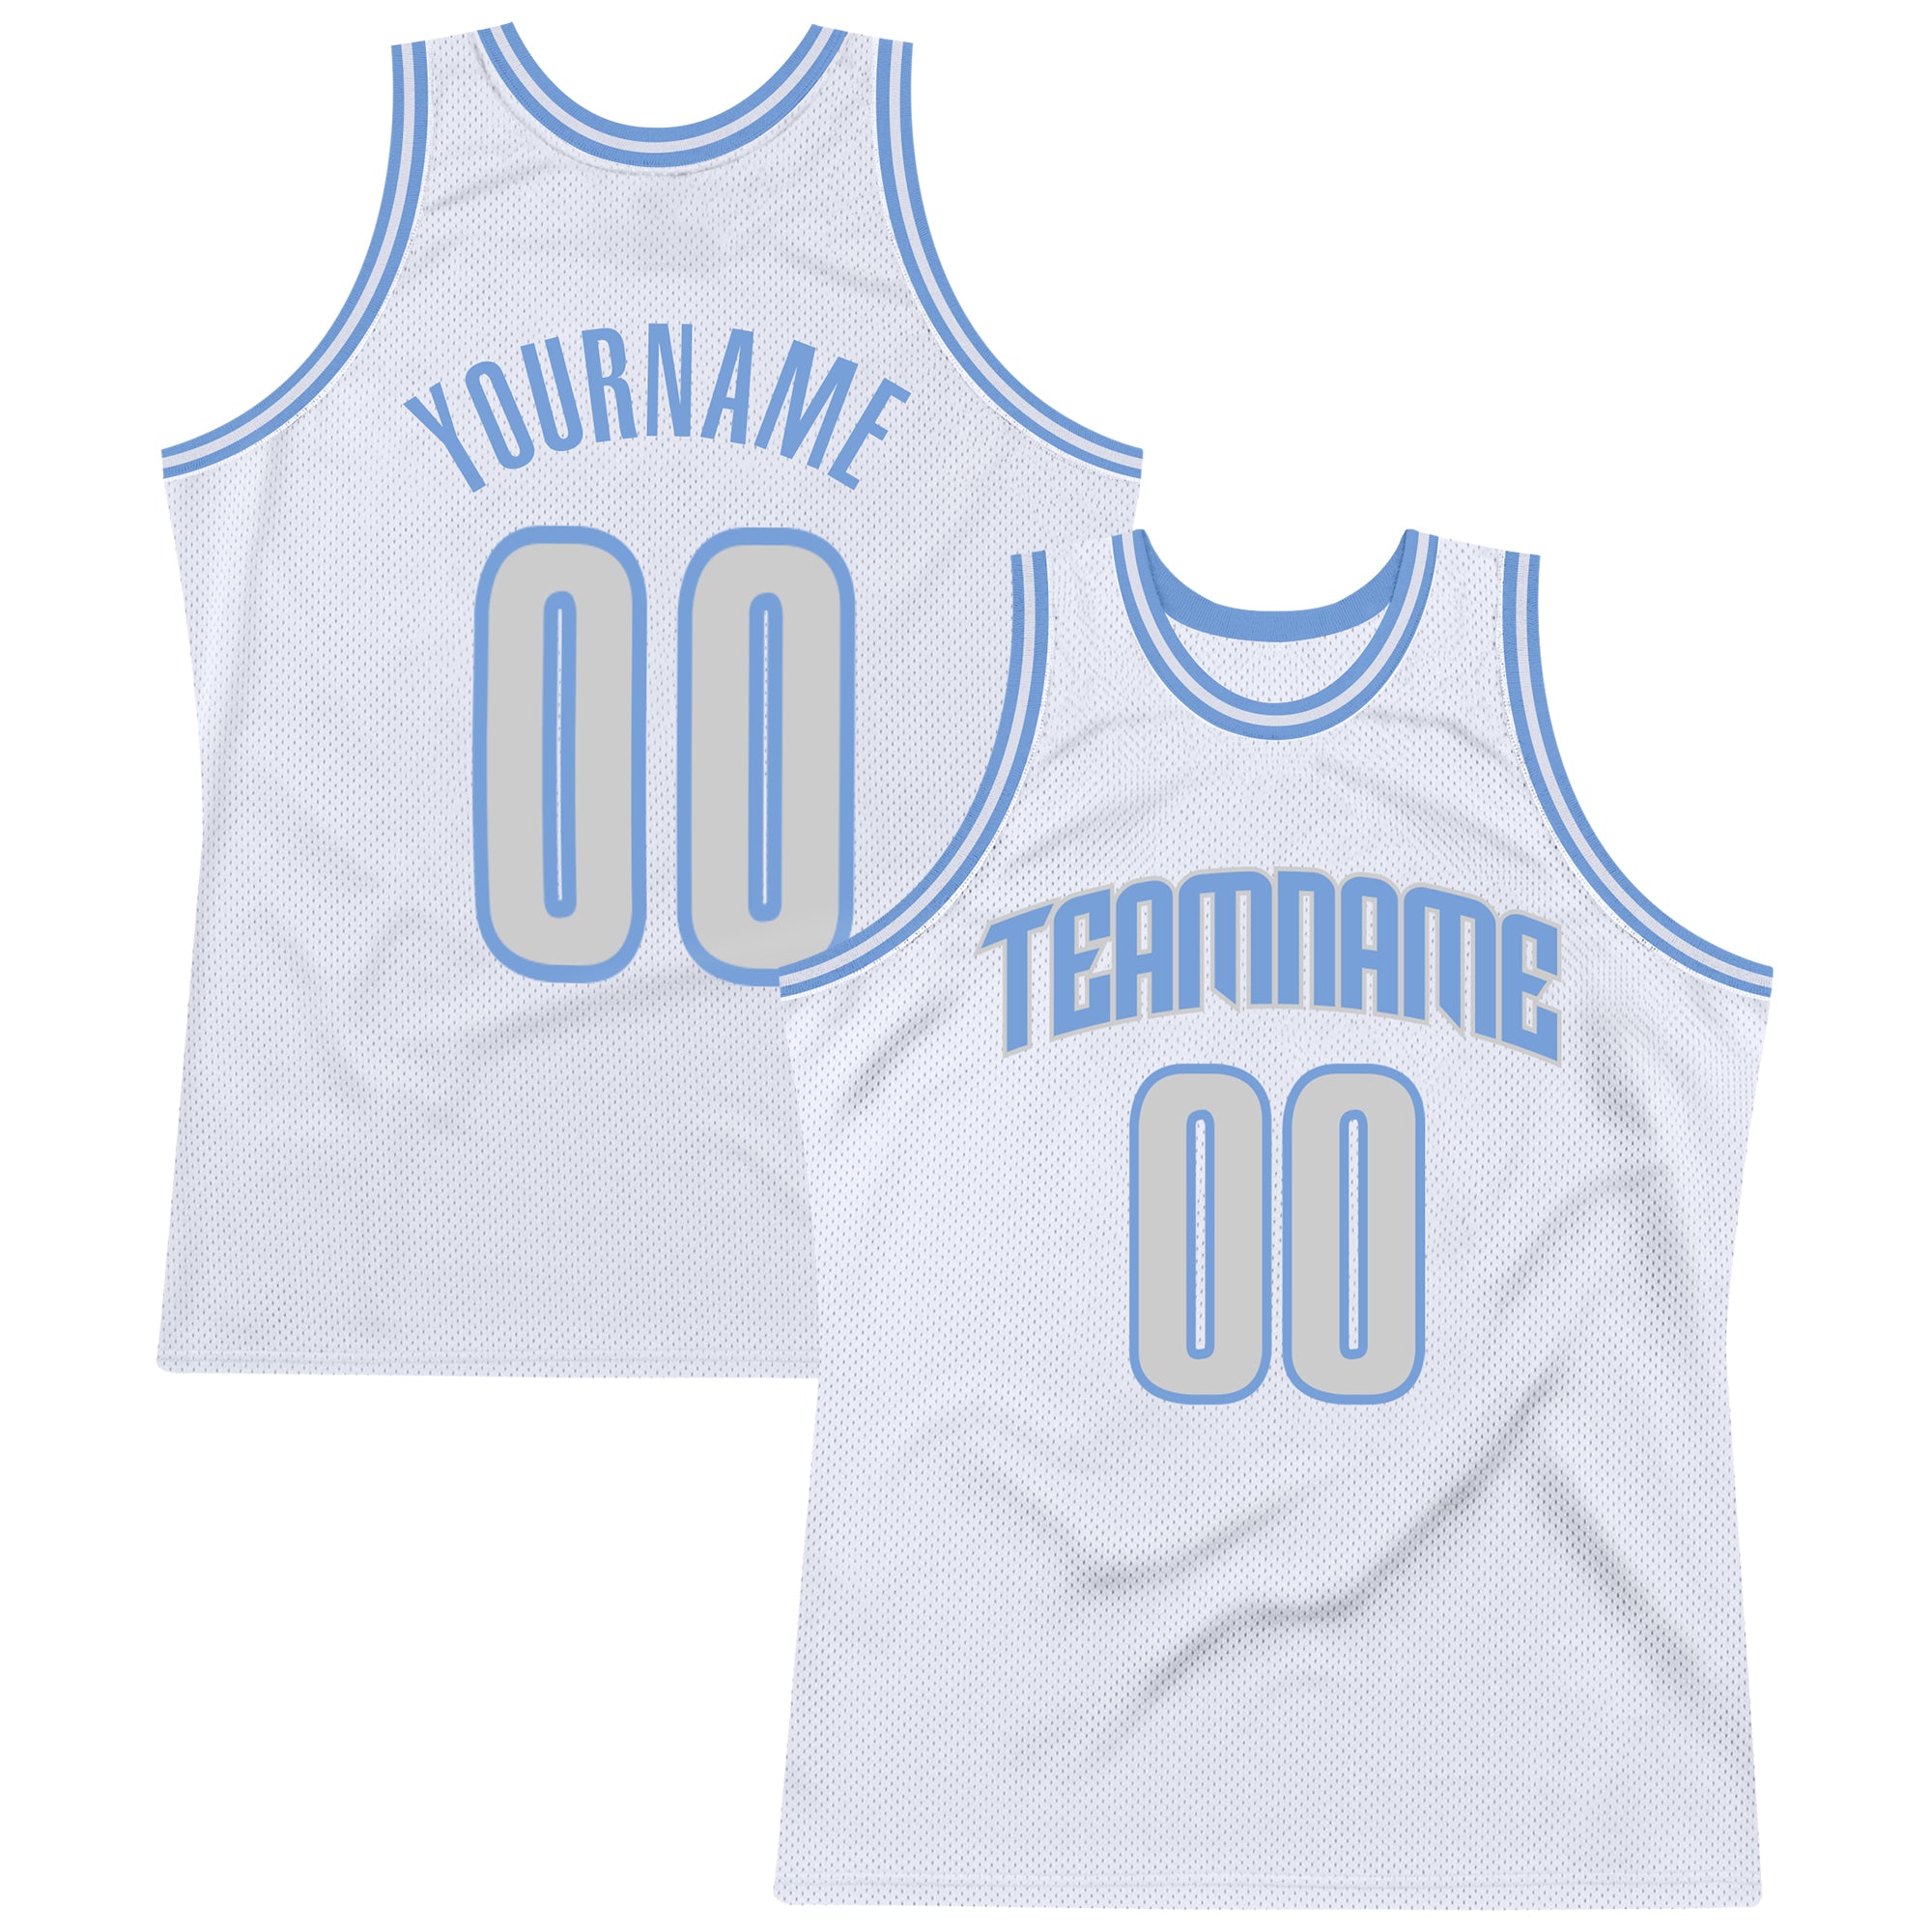 FANSIDEA Custom White Silver Gray-Light Blue Authentic Throwback Basketball Jersey Men's Size:S